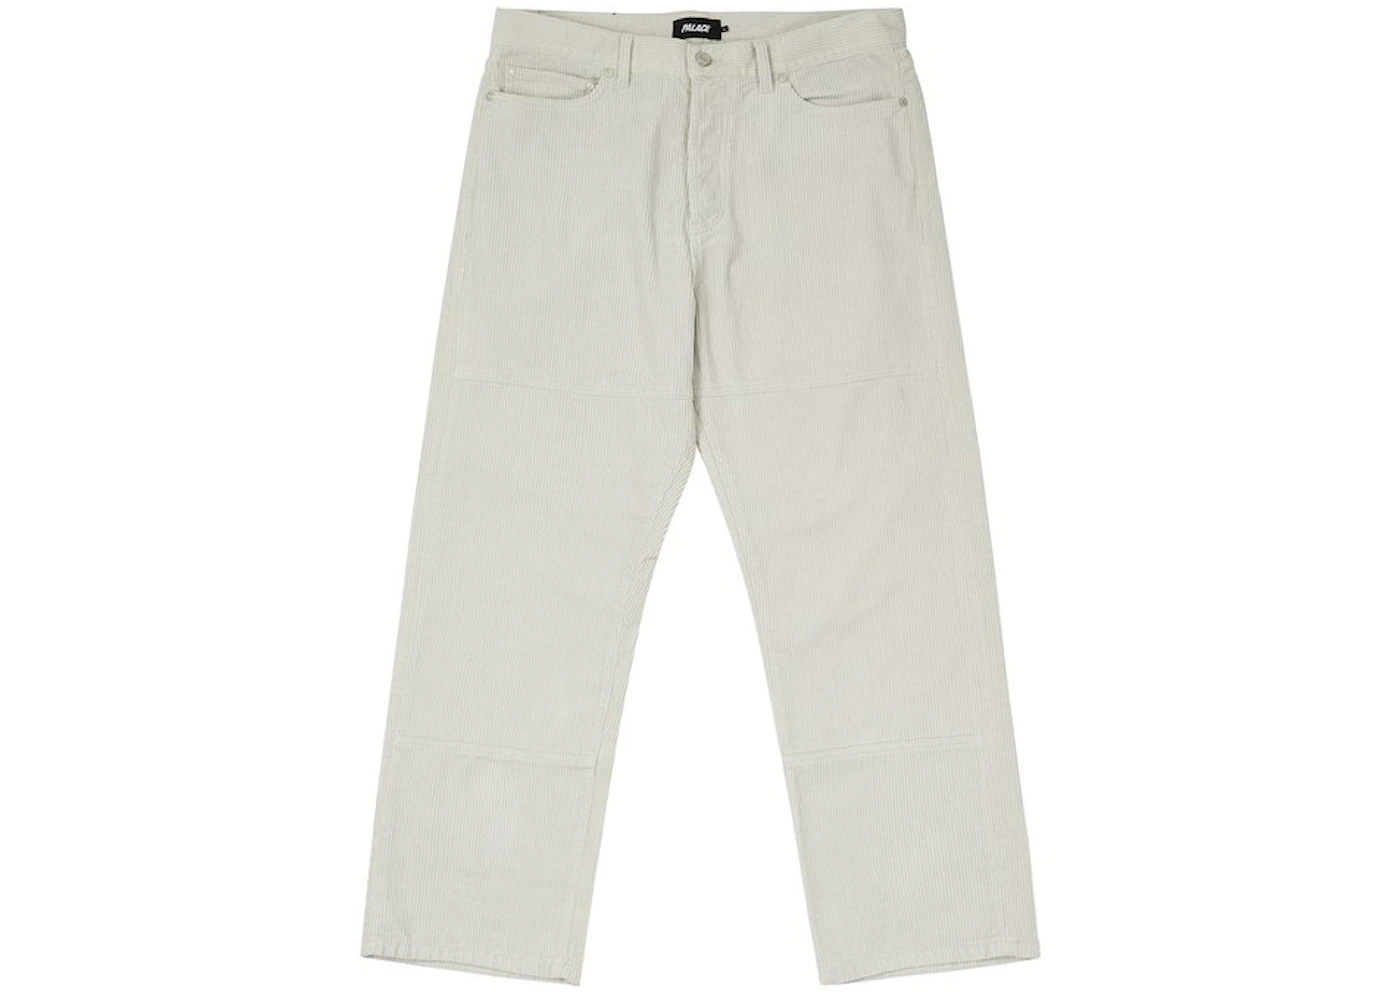 Palace Washed Cord Trouser White Men's - GB